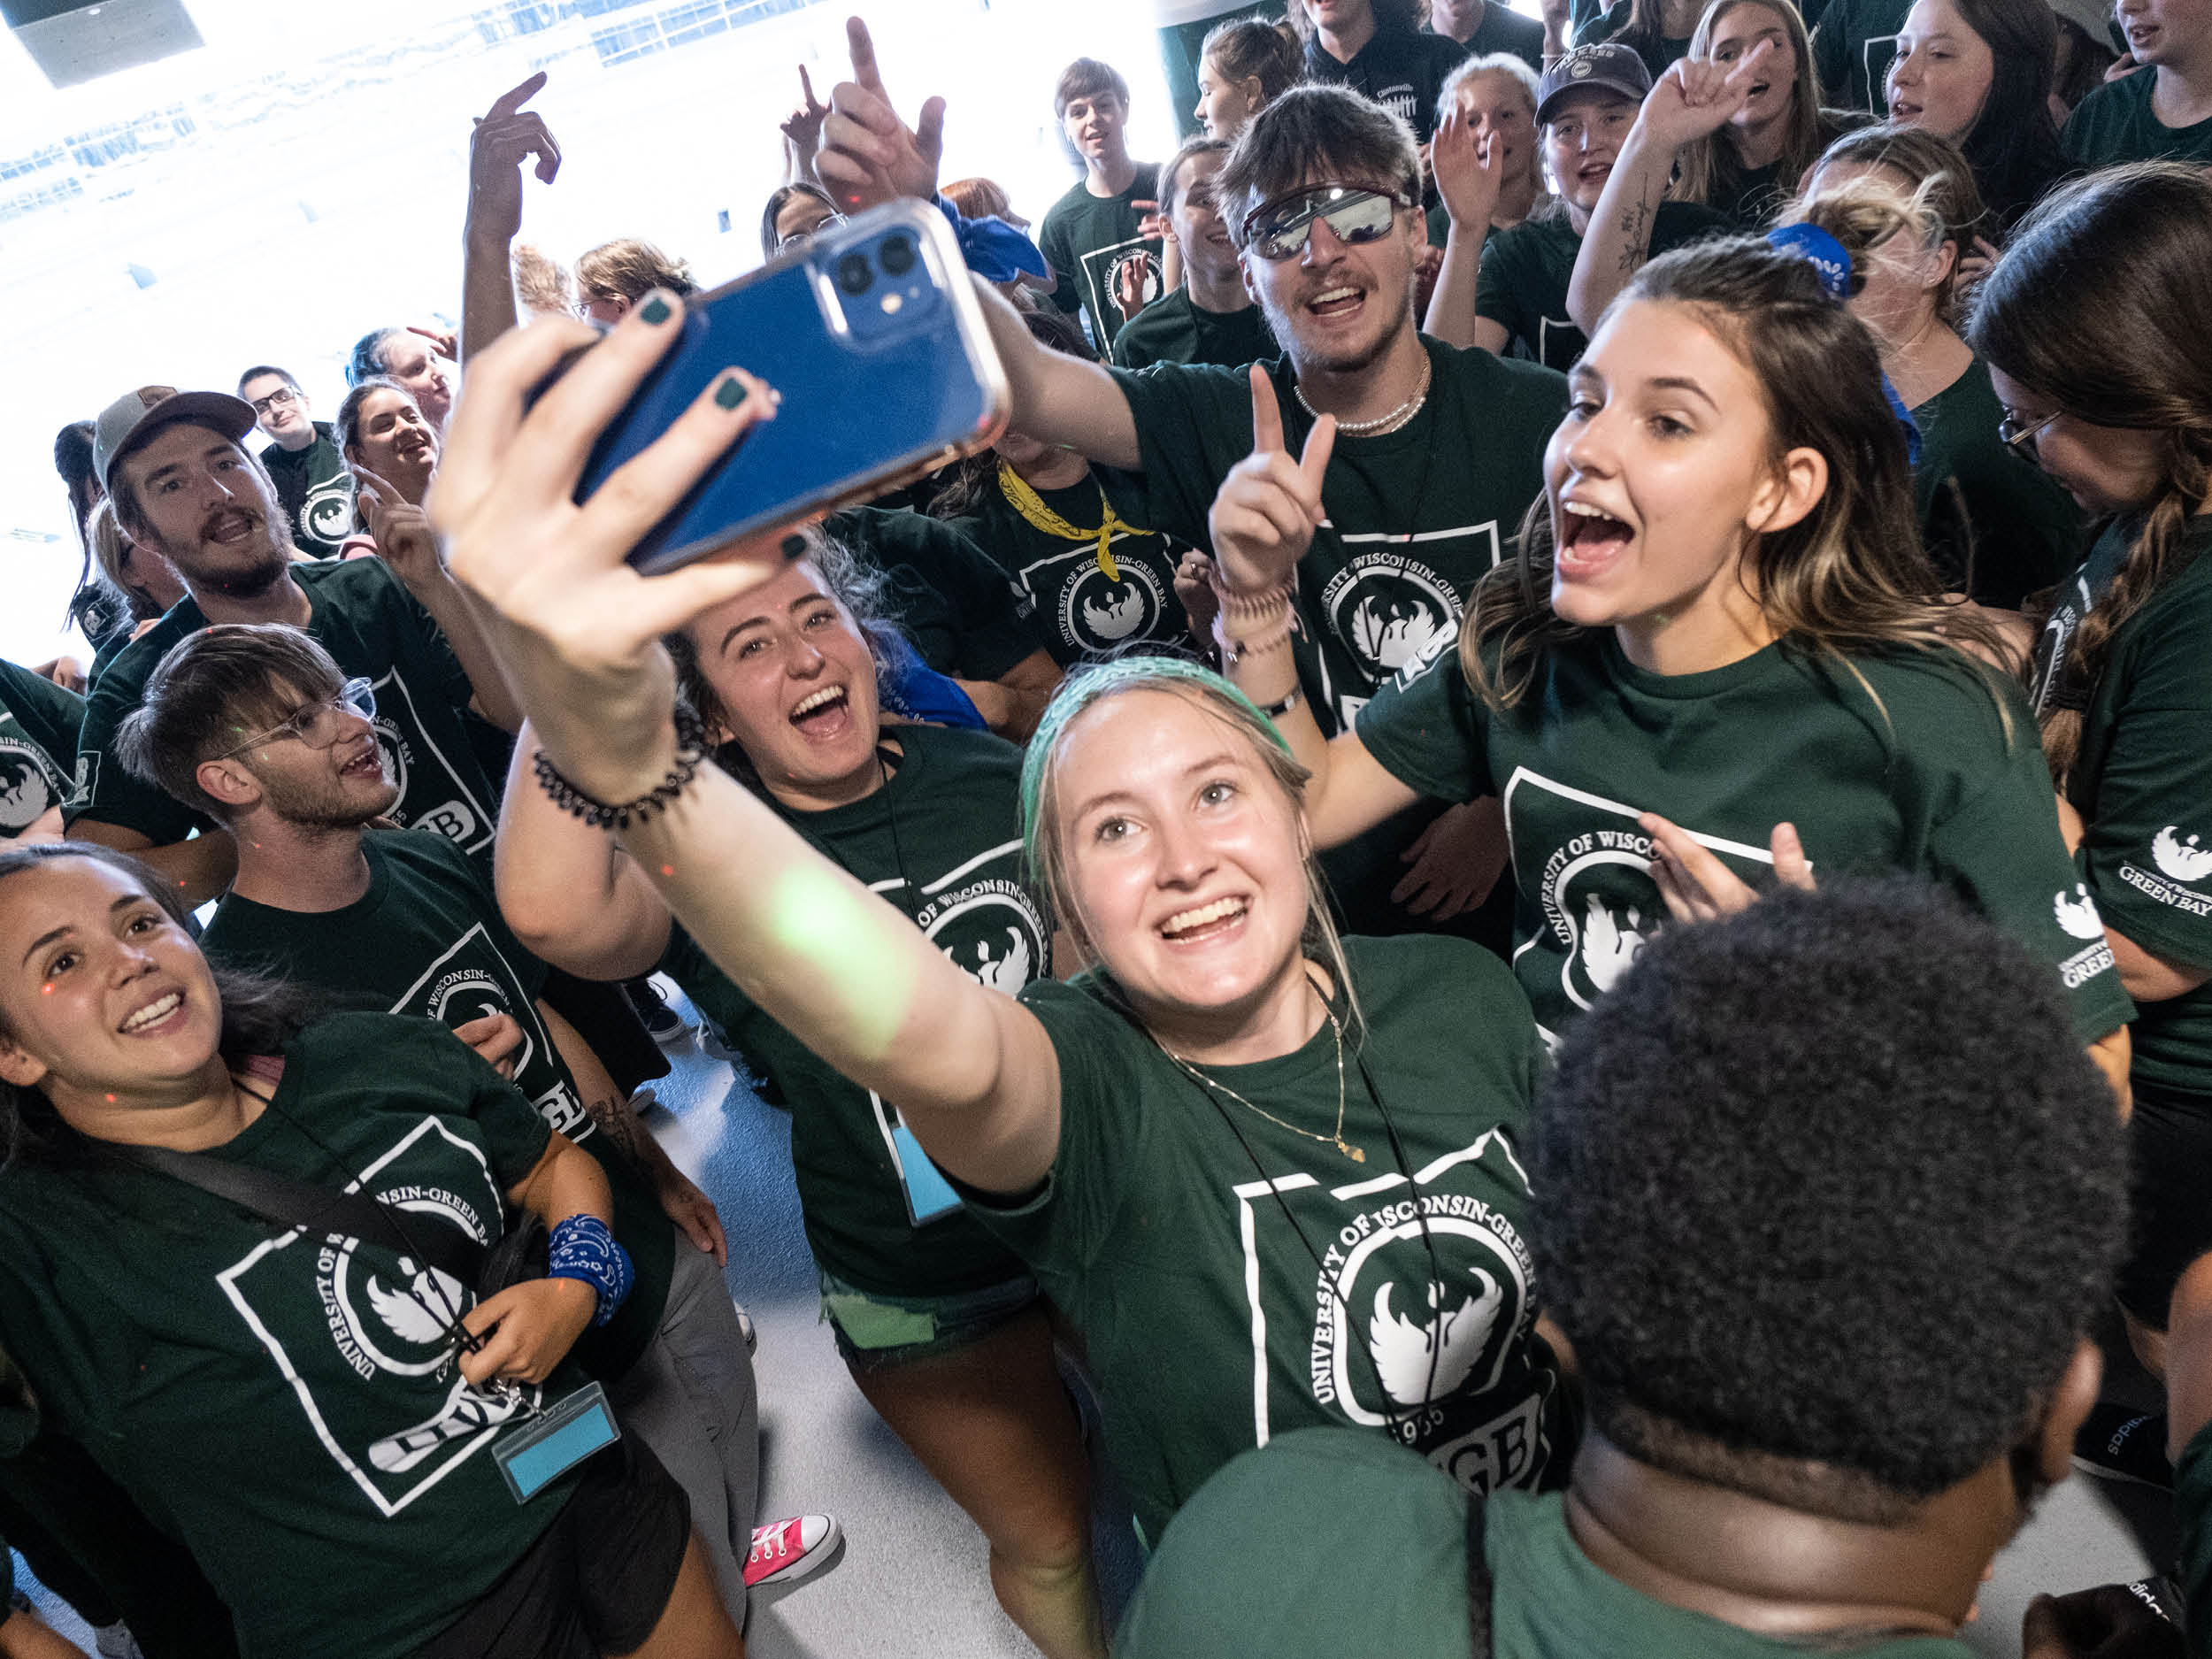 A large crowd of students gather at Lambeau Field for their civic engagement celebration in September 2022. Students in the foreground pose for a selfie.